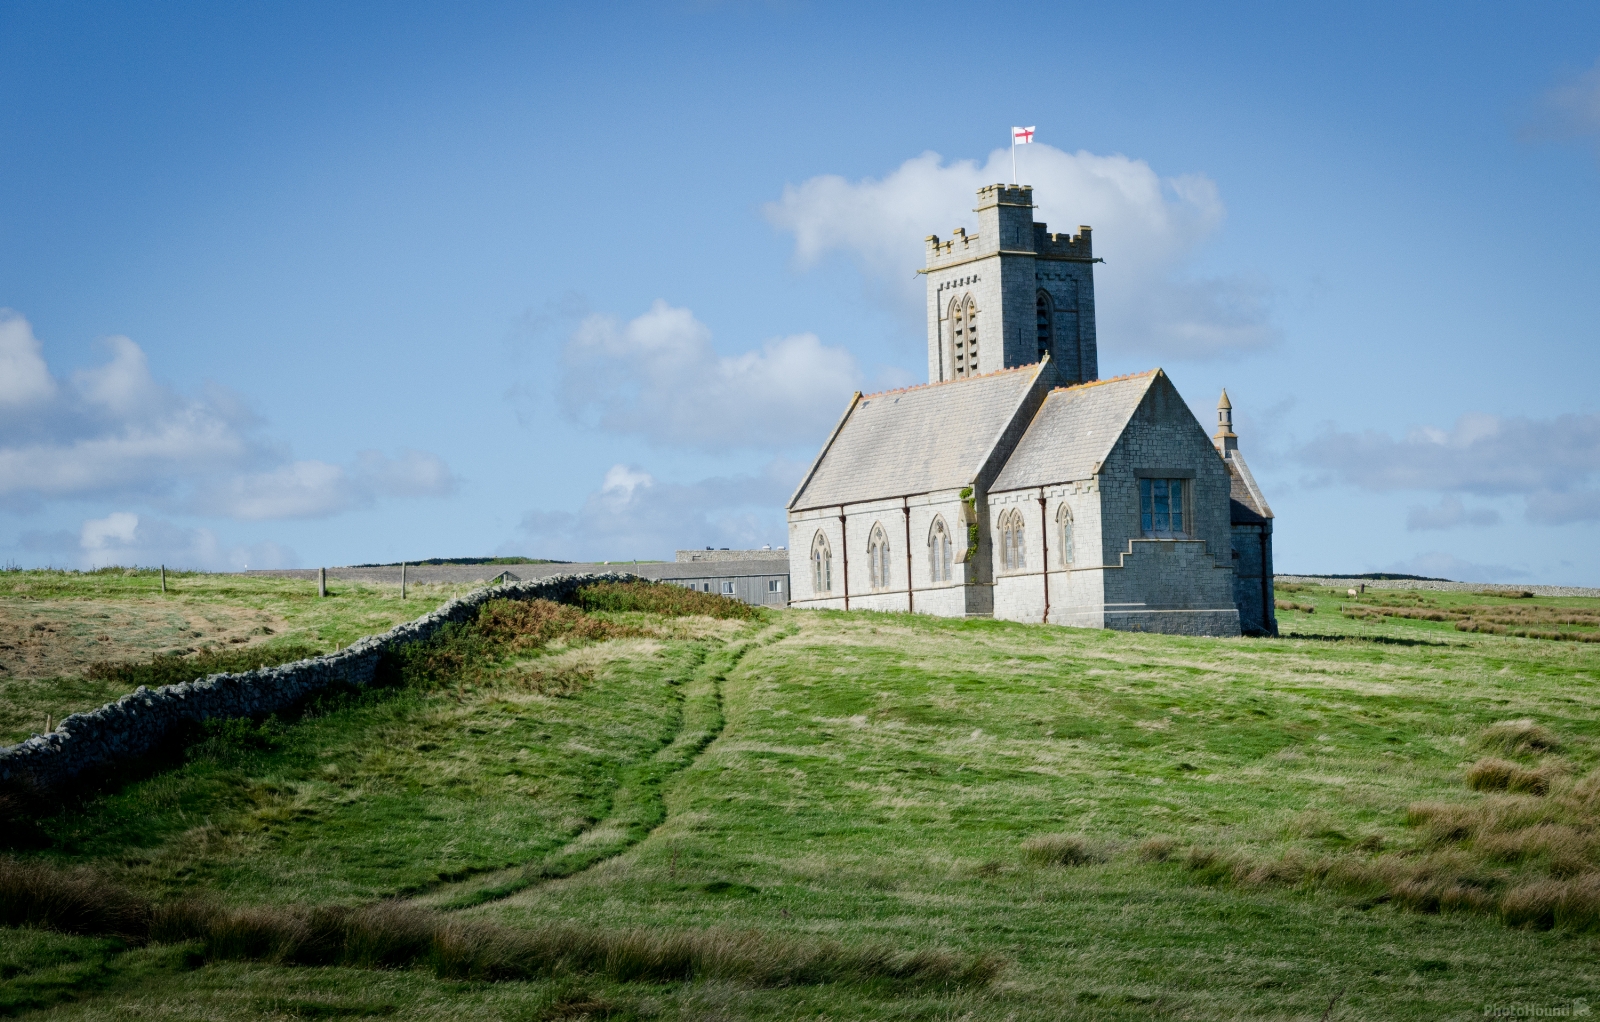 Image of Lundy Island - St Helens church by Richard Lizzimore